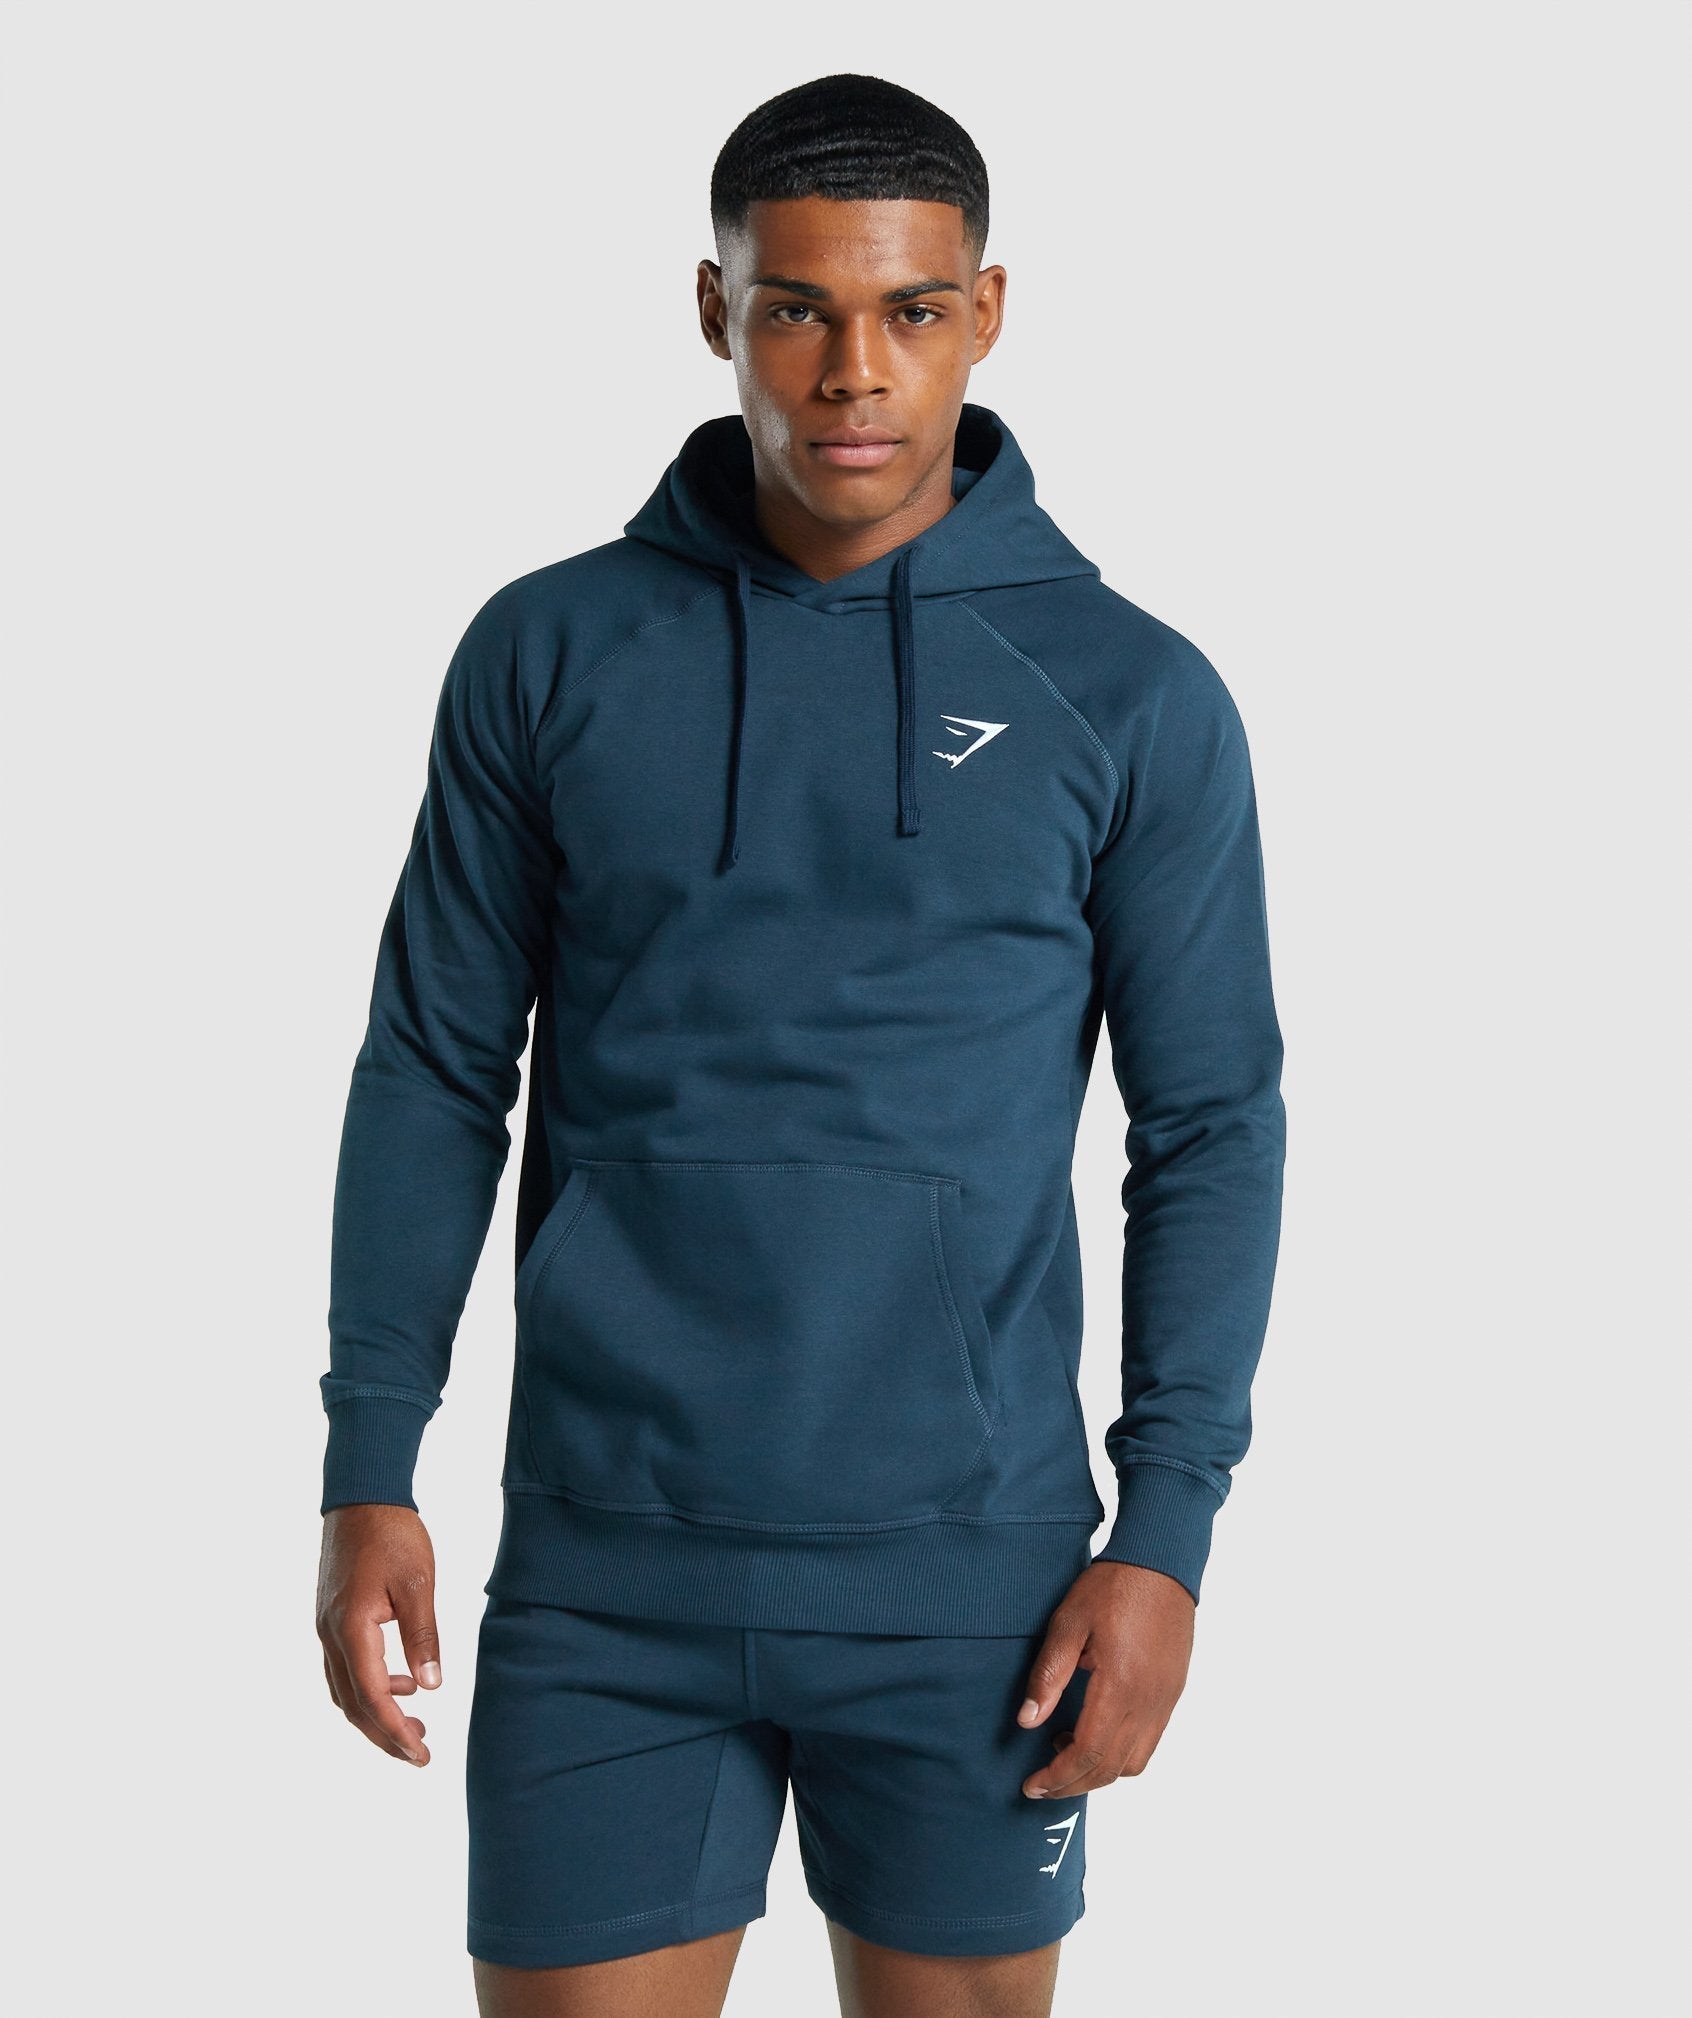 Gymshark - Fit evolution. The all new Fit tracksuit. Undeniably